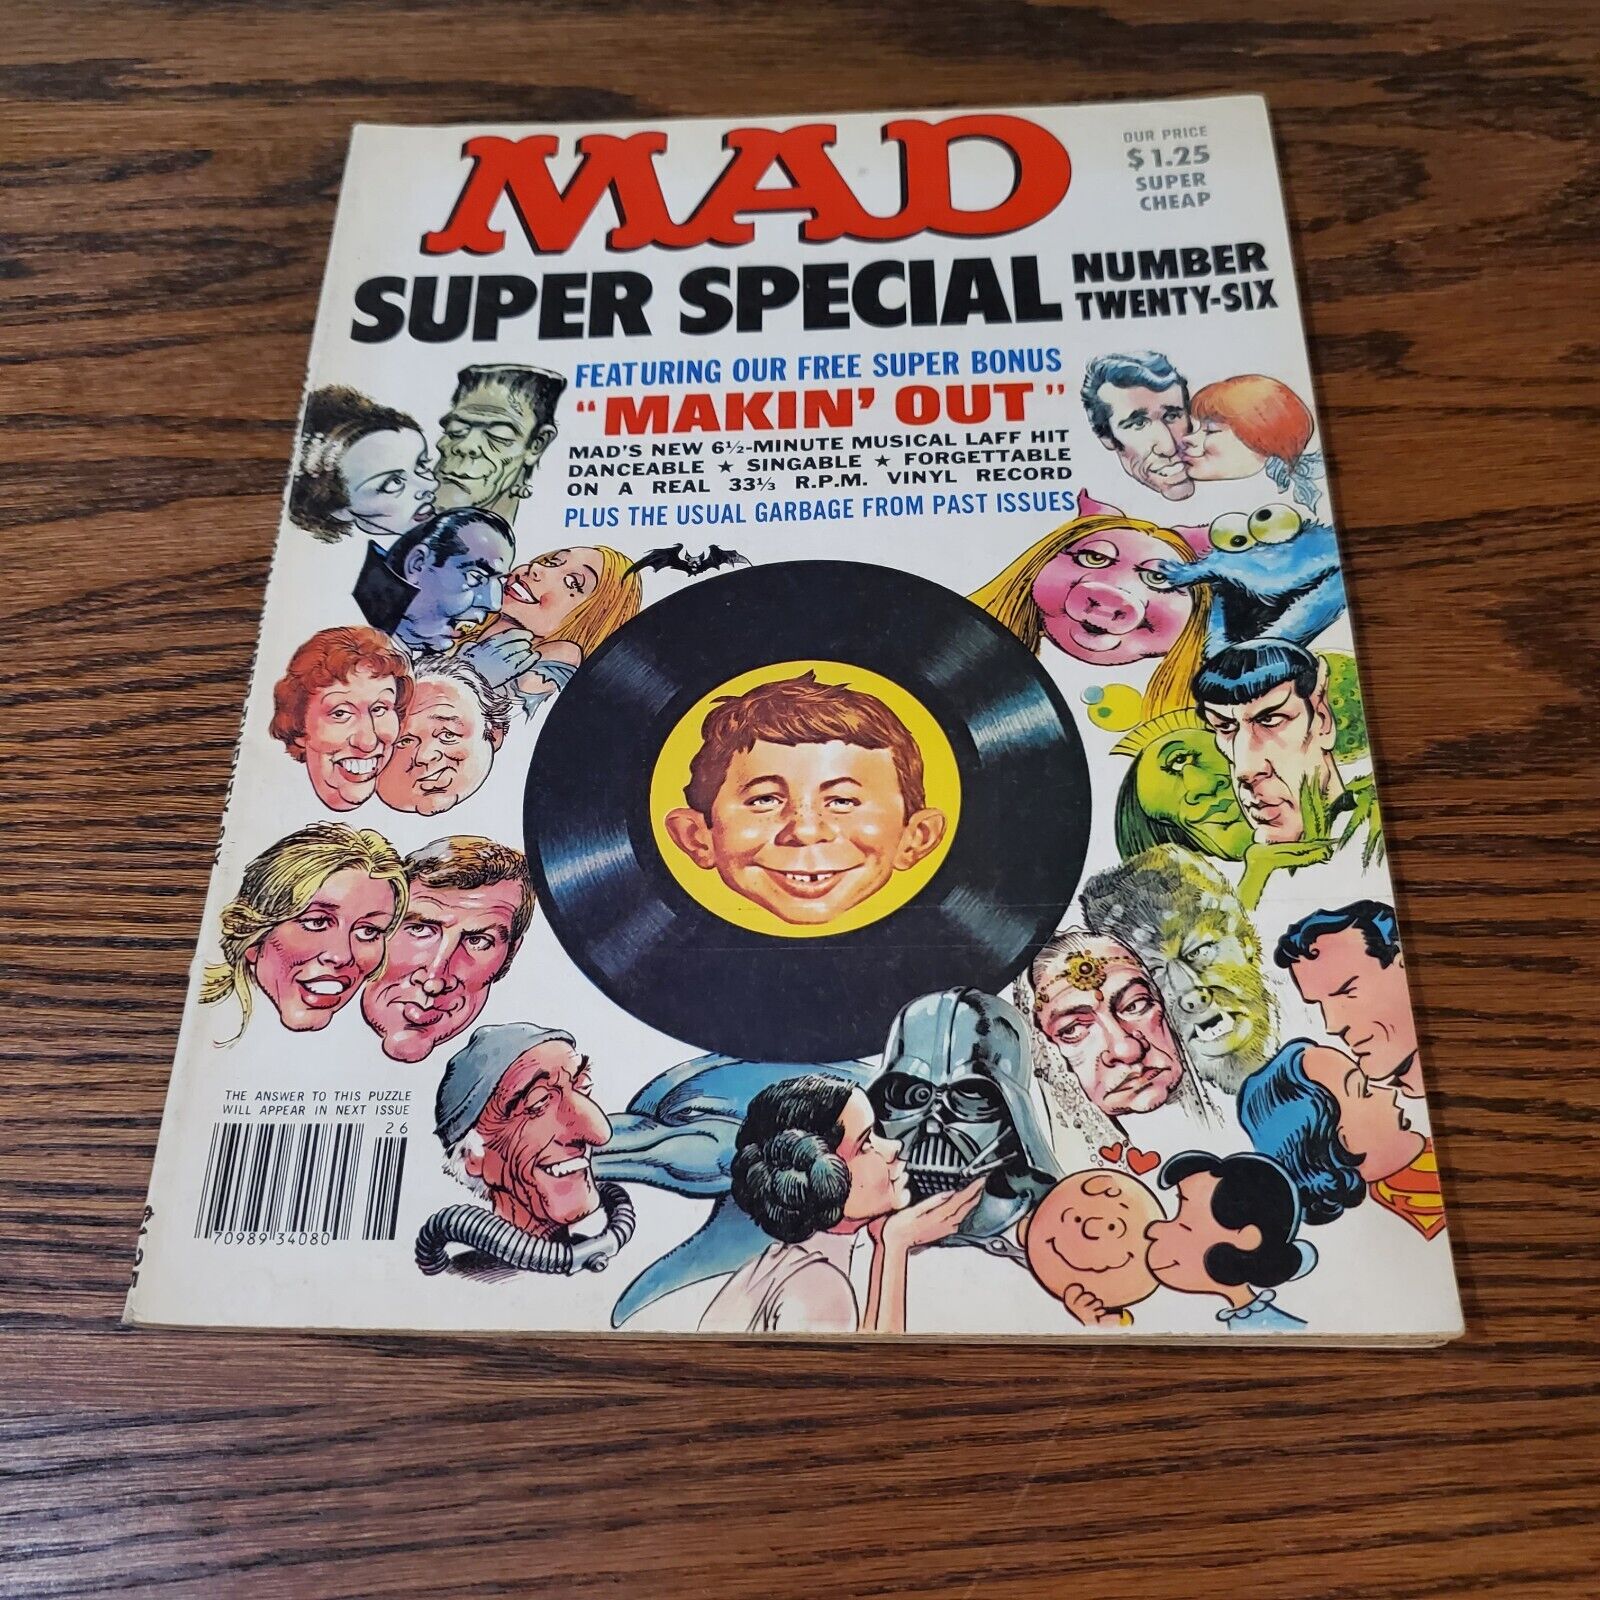 MAD SUPER SPECIAL NUMBER  TWENTY SIX Magazine, Record Removed